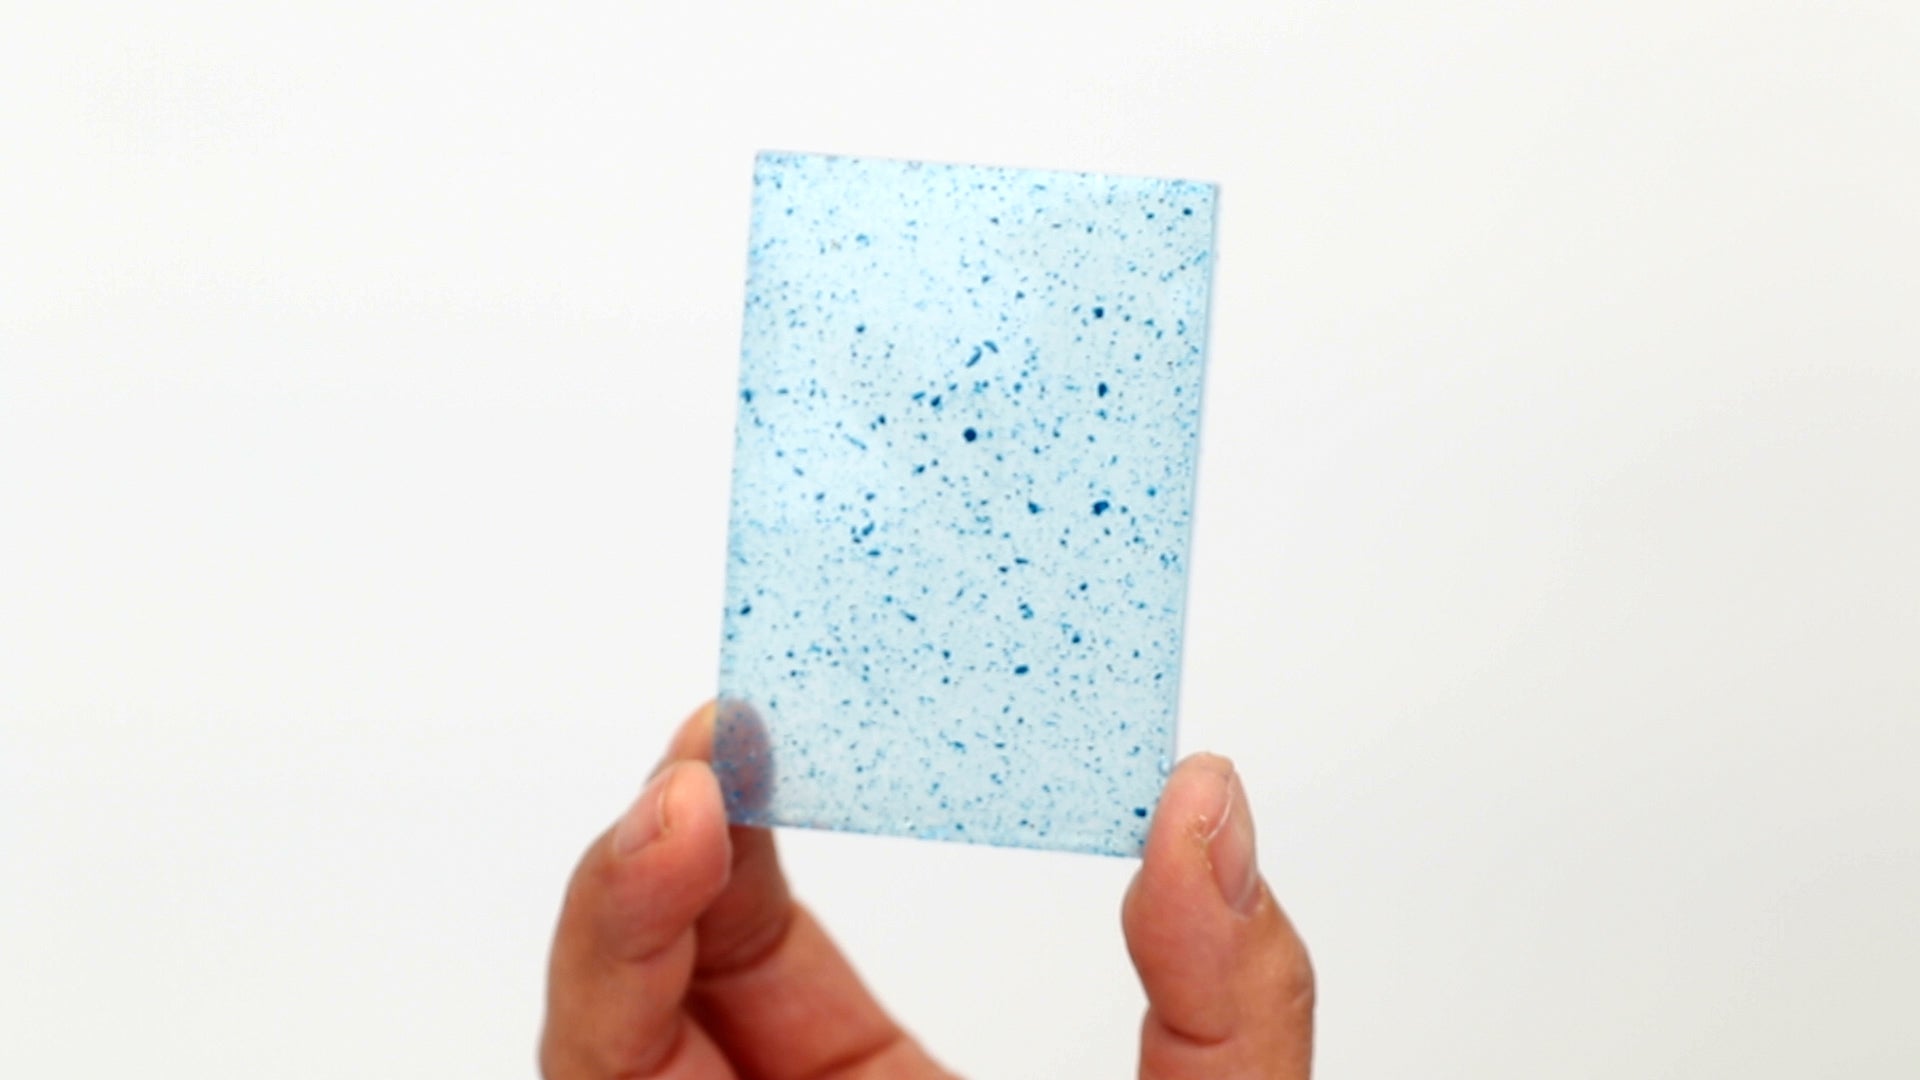 how to color clear epoxy resin - ground chalk is too coarse and won't dissolve well in resin